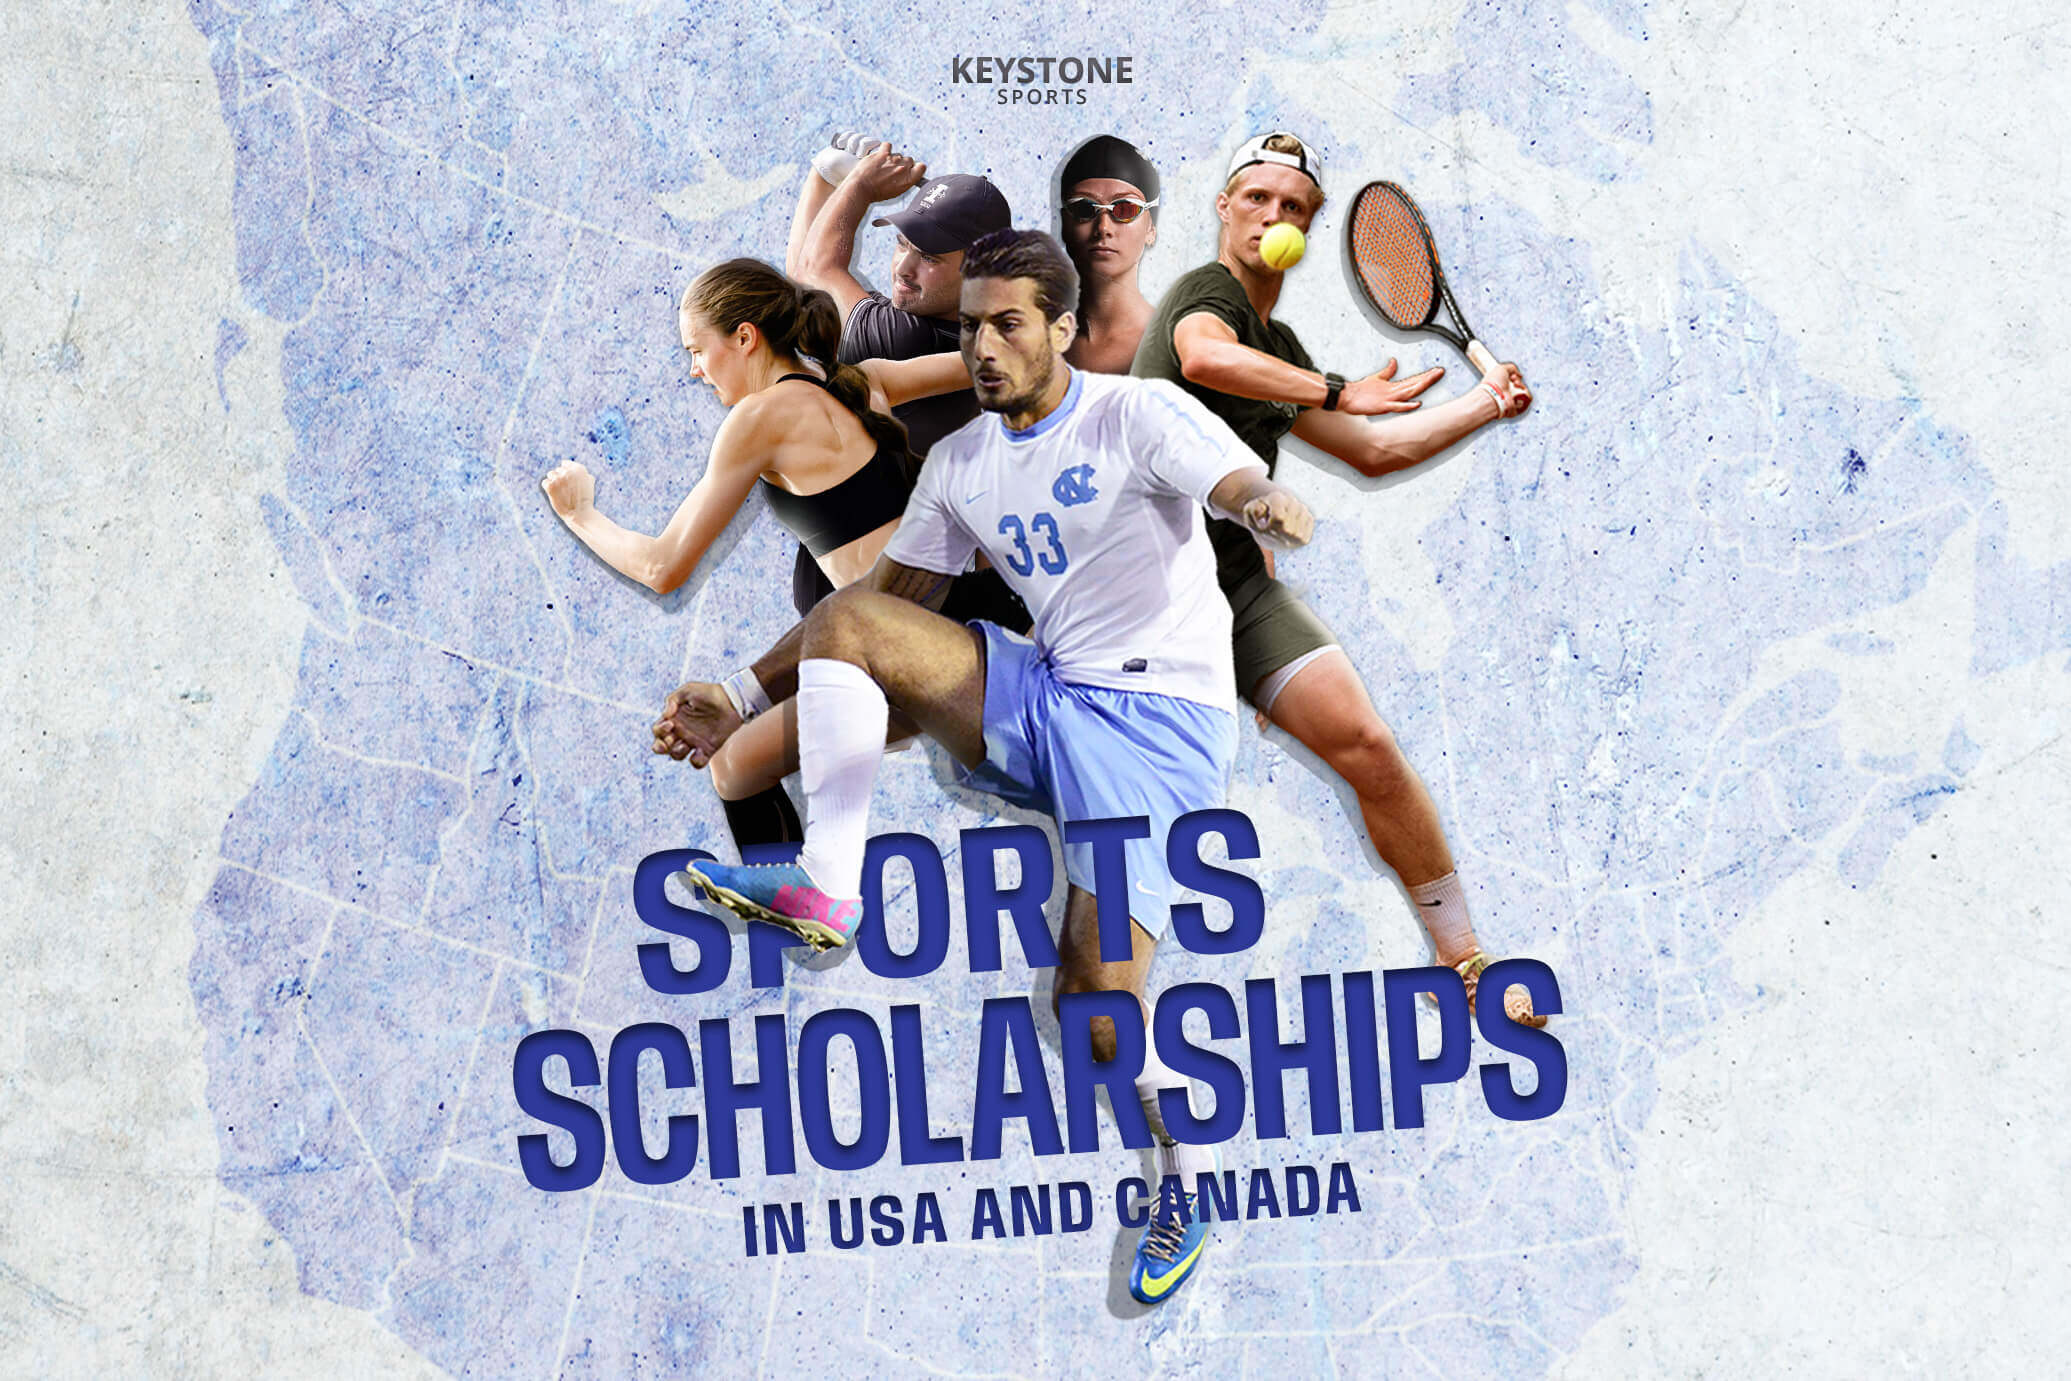 Sports Scholarships in the USA and Canada with Keystone Sports.